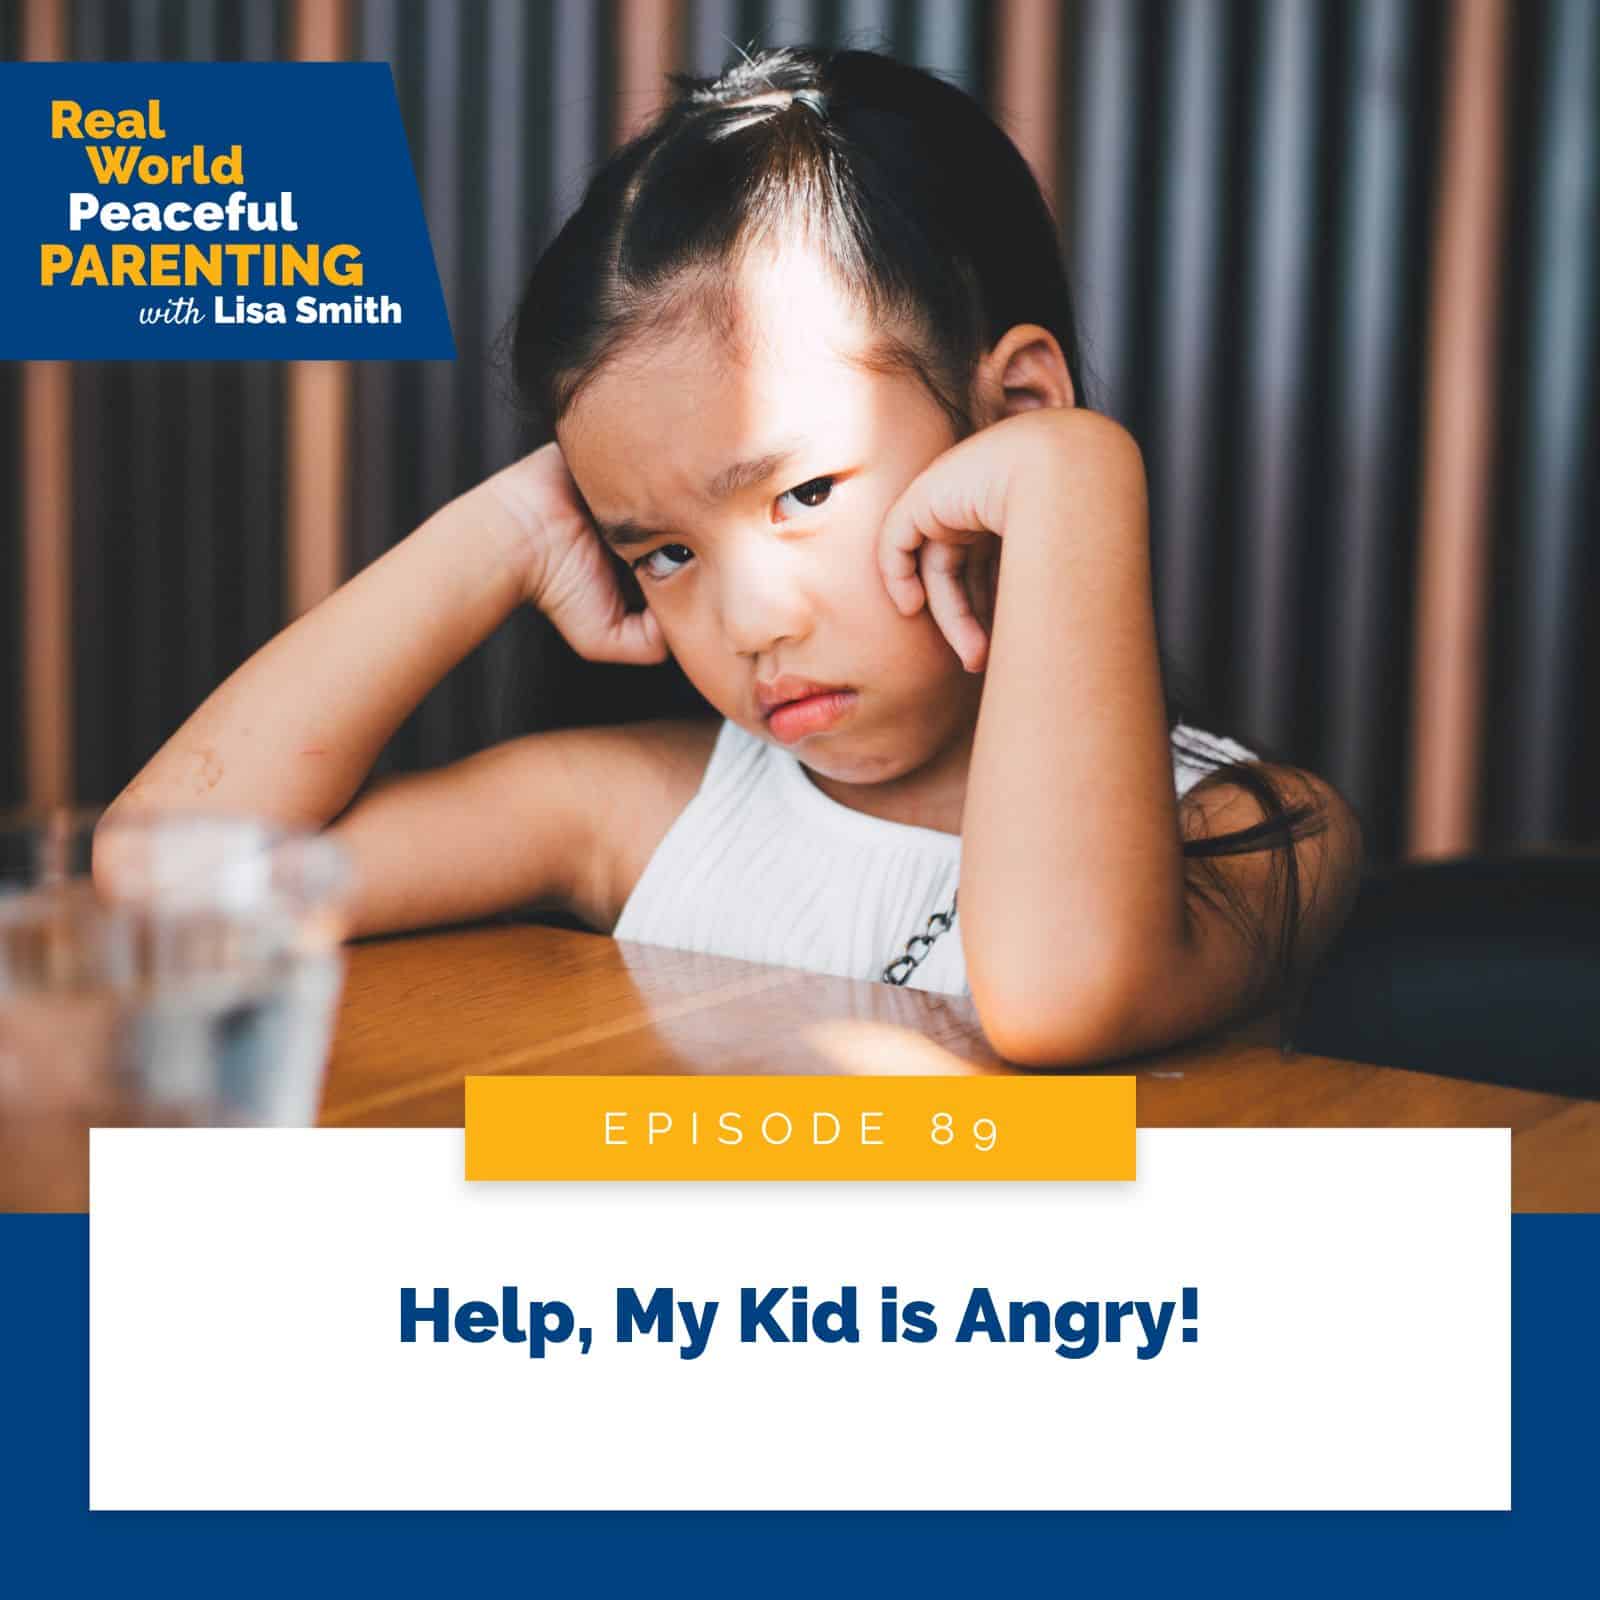 Real World Peaceful Parenting with Lisa Smith | Help, My Kid is Angry!